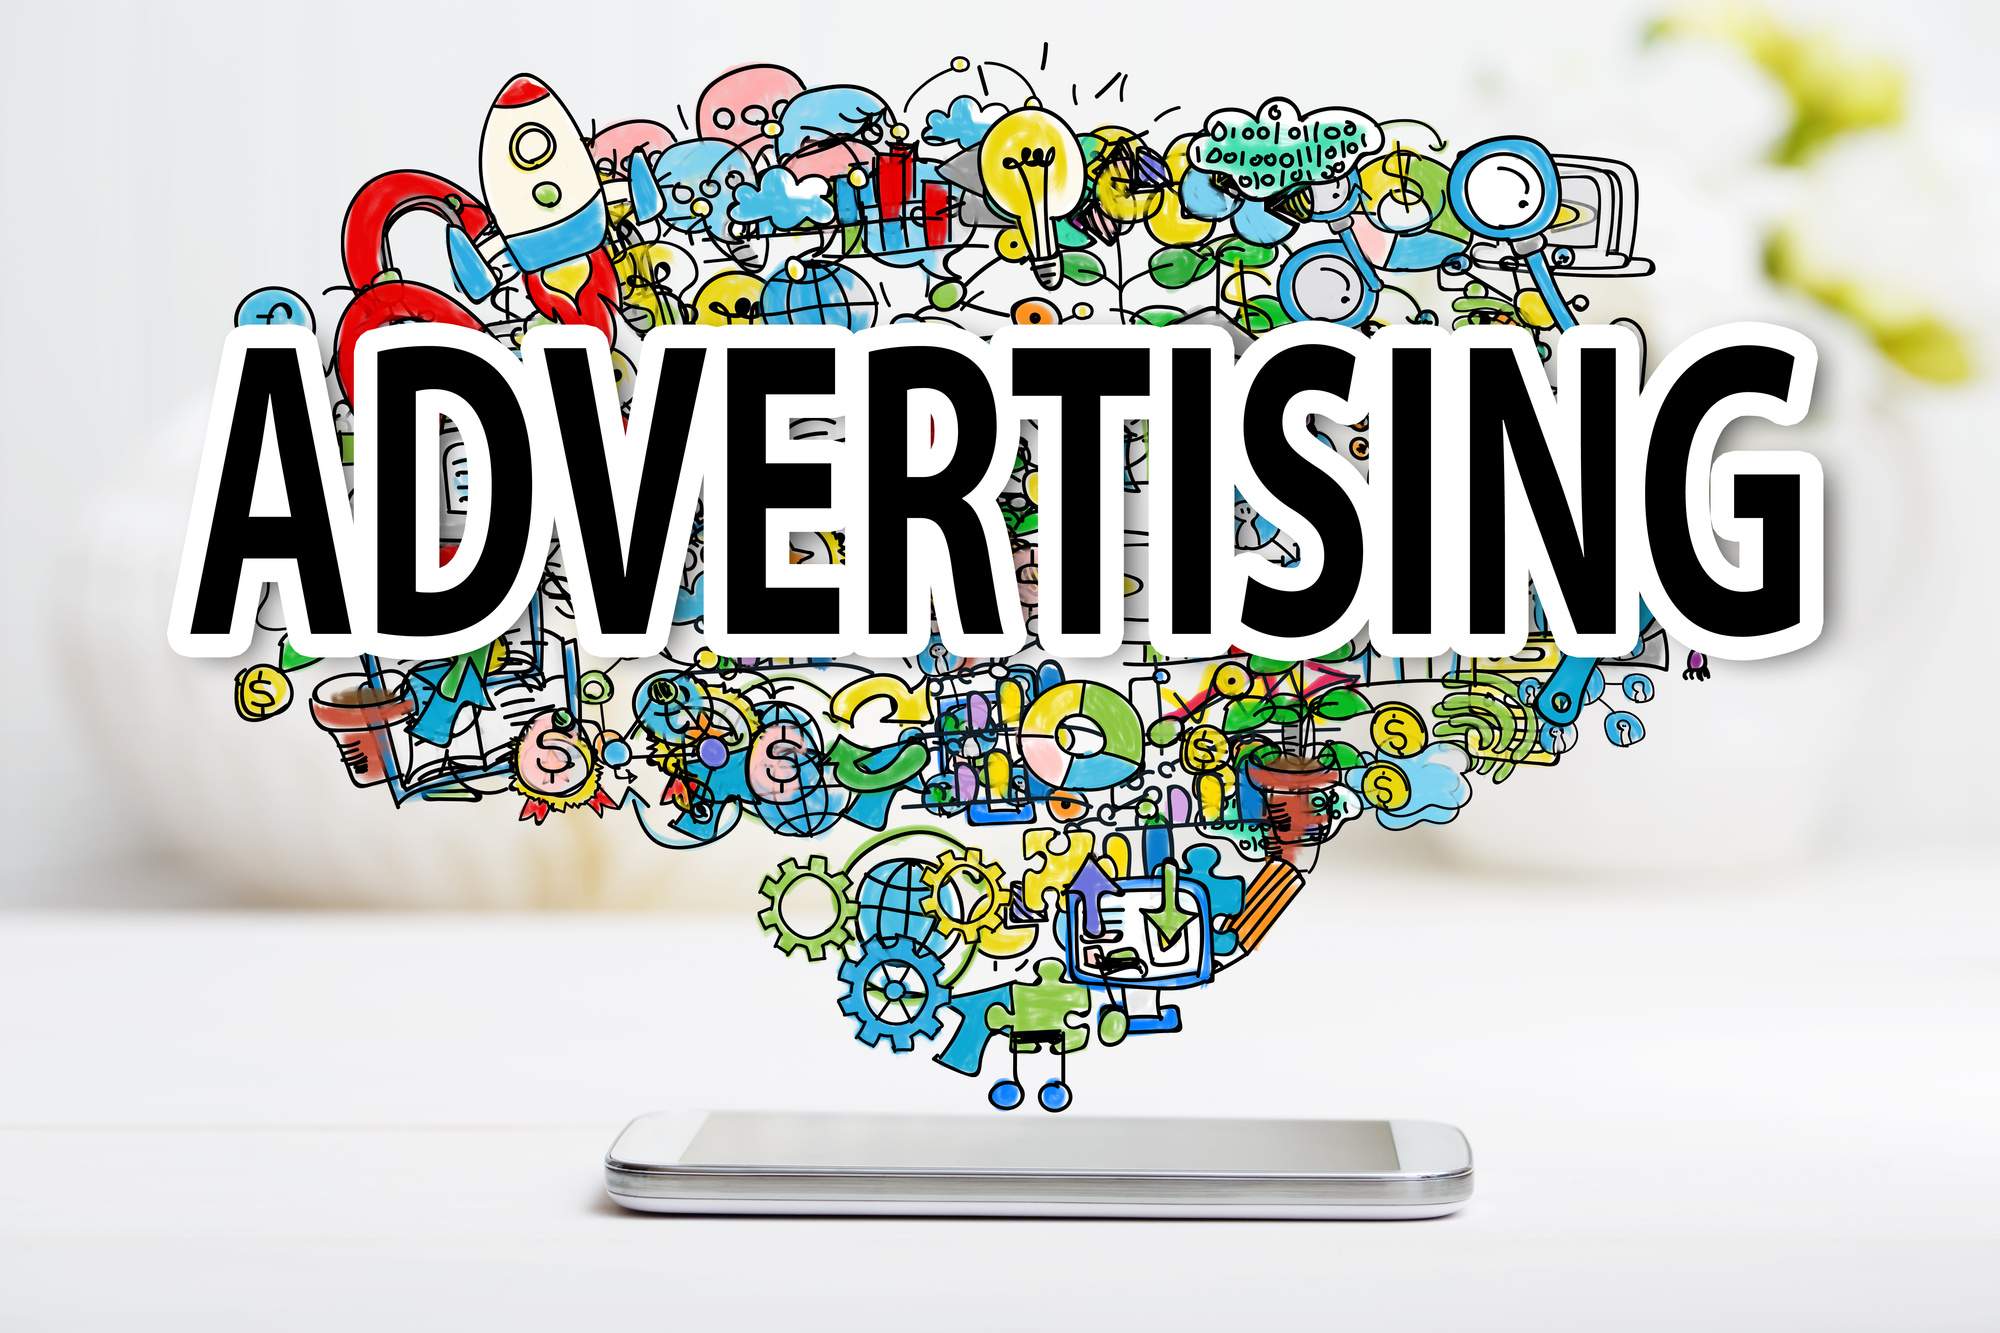 5 New Advertising Trends to Hop on Right Now